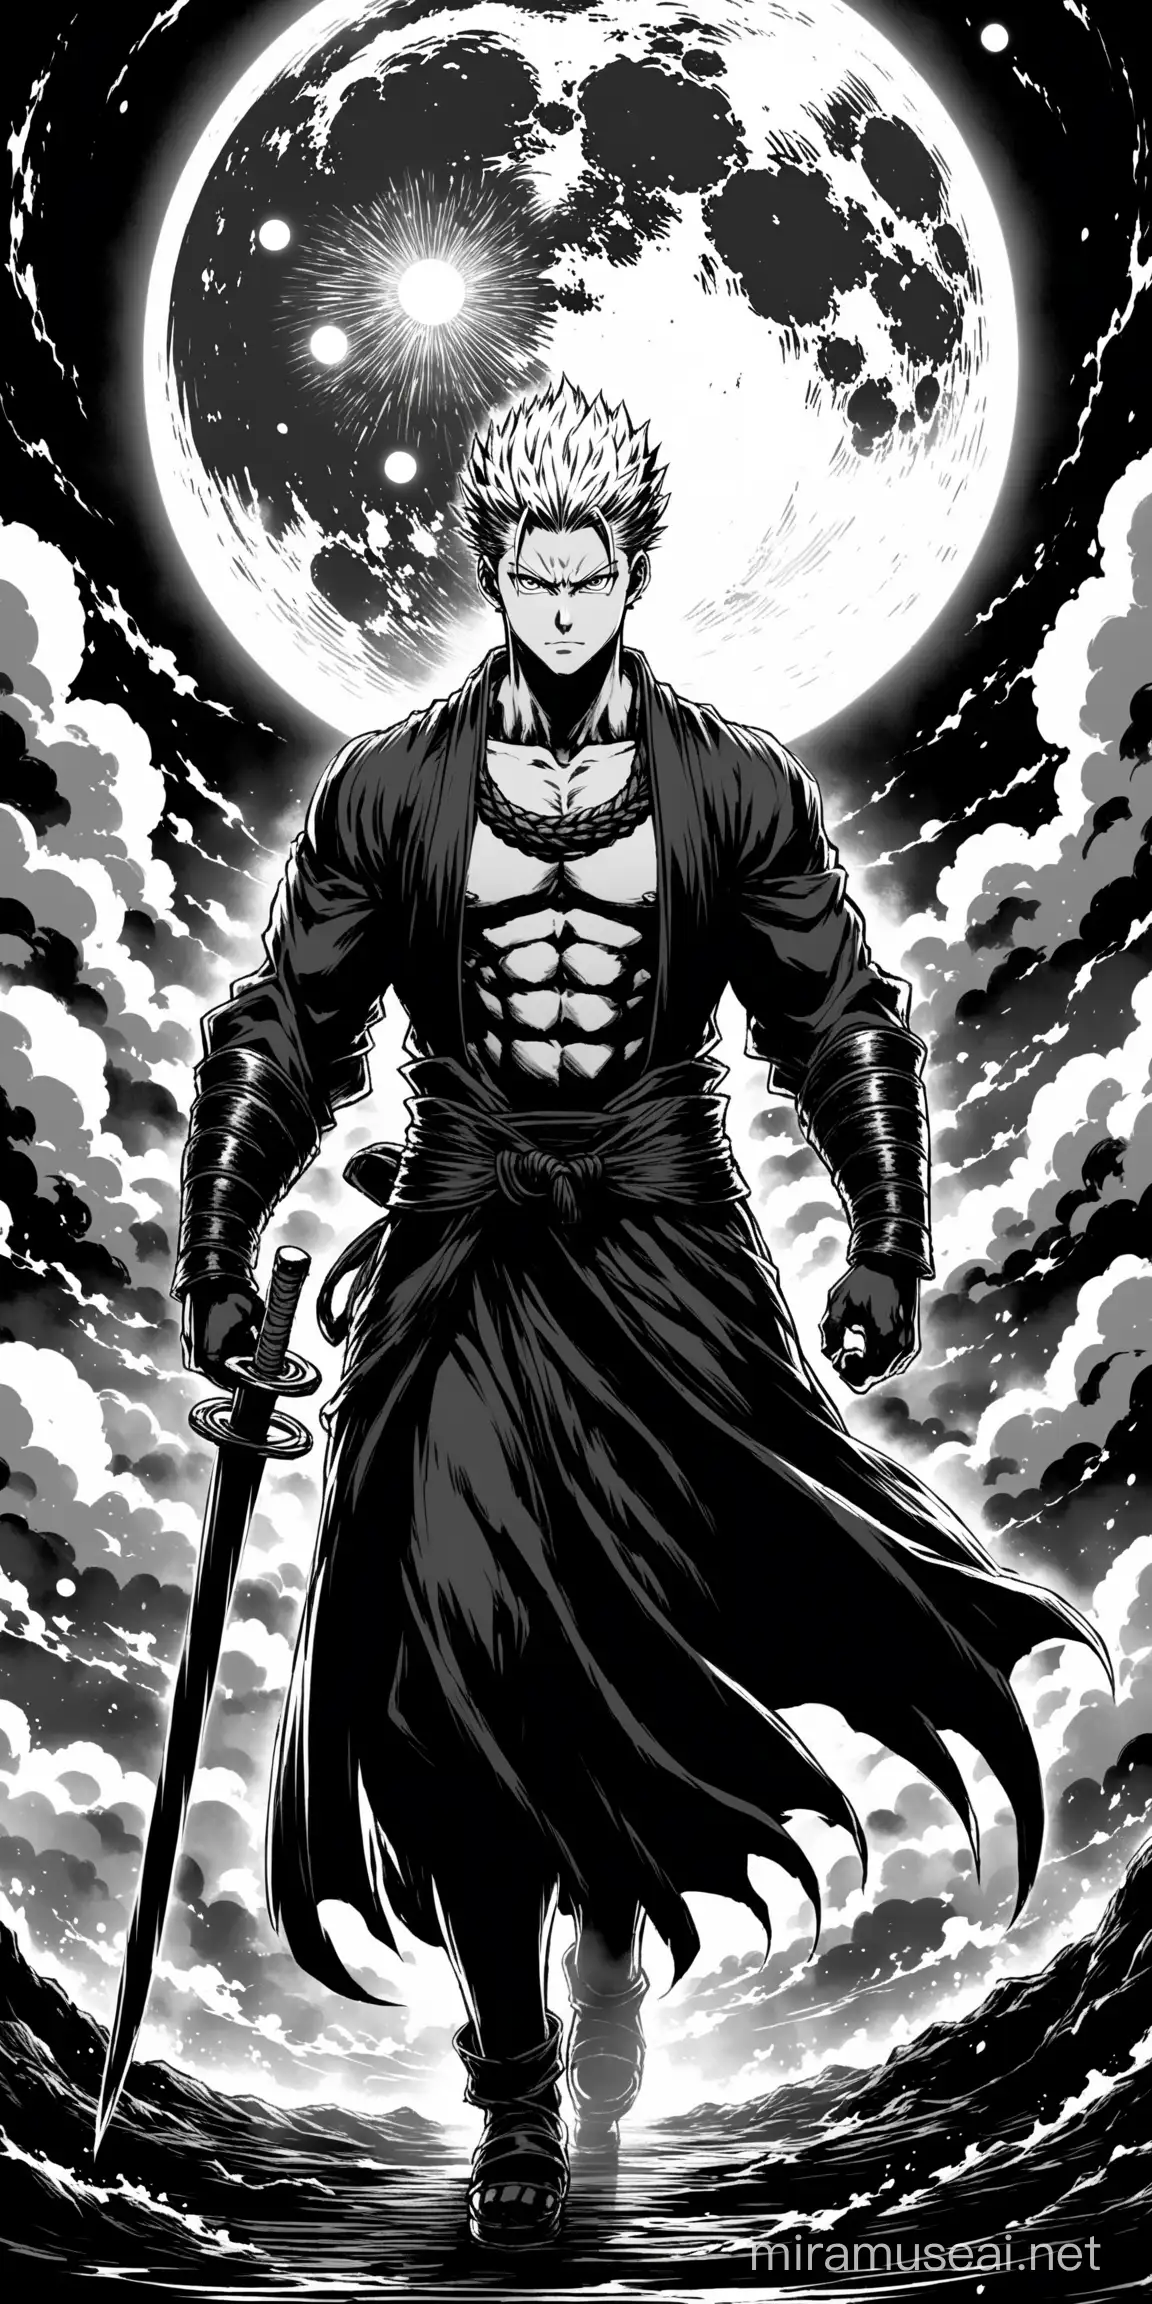 Capture the essence of Sukuna from Jujutsu Kaisen walking towards the camera against the backdrop of a dramatic moon eclipse. The scene should be rendered in the distinctive Kentaro Miura art style, characterized by its eerie and surreal elements. Employ a black and white palette with subtle hints of fire, enhancing the atmosphere of intensity and power. Emphasize the warrior's masculine physique and regal presence, evoking the aura of a king striding confidently into battle.